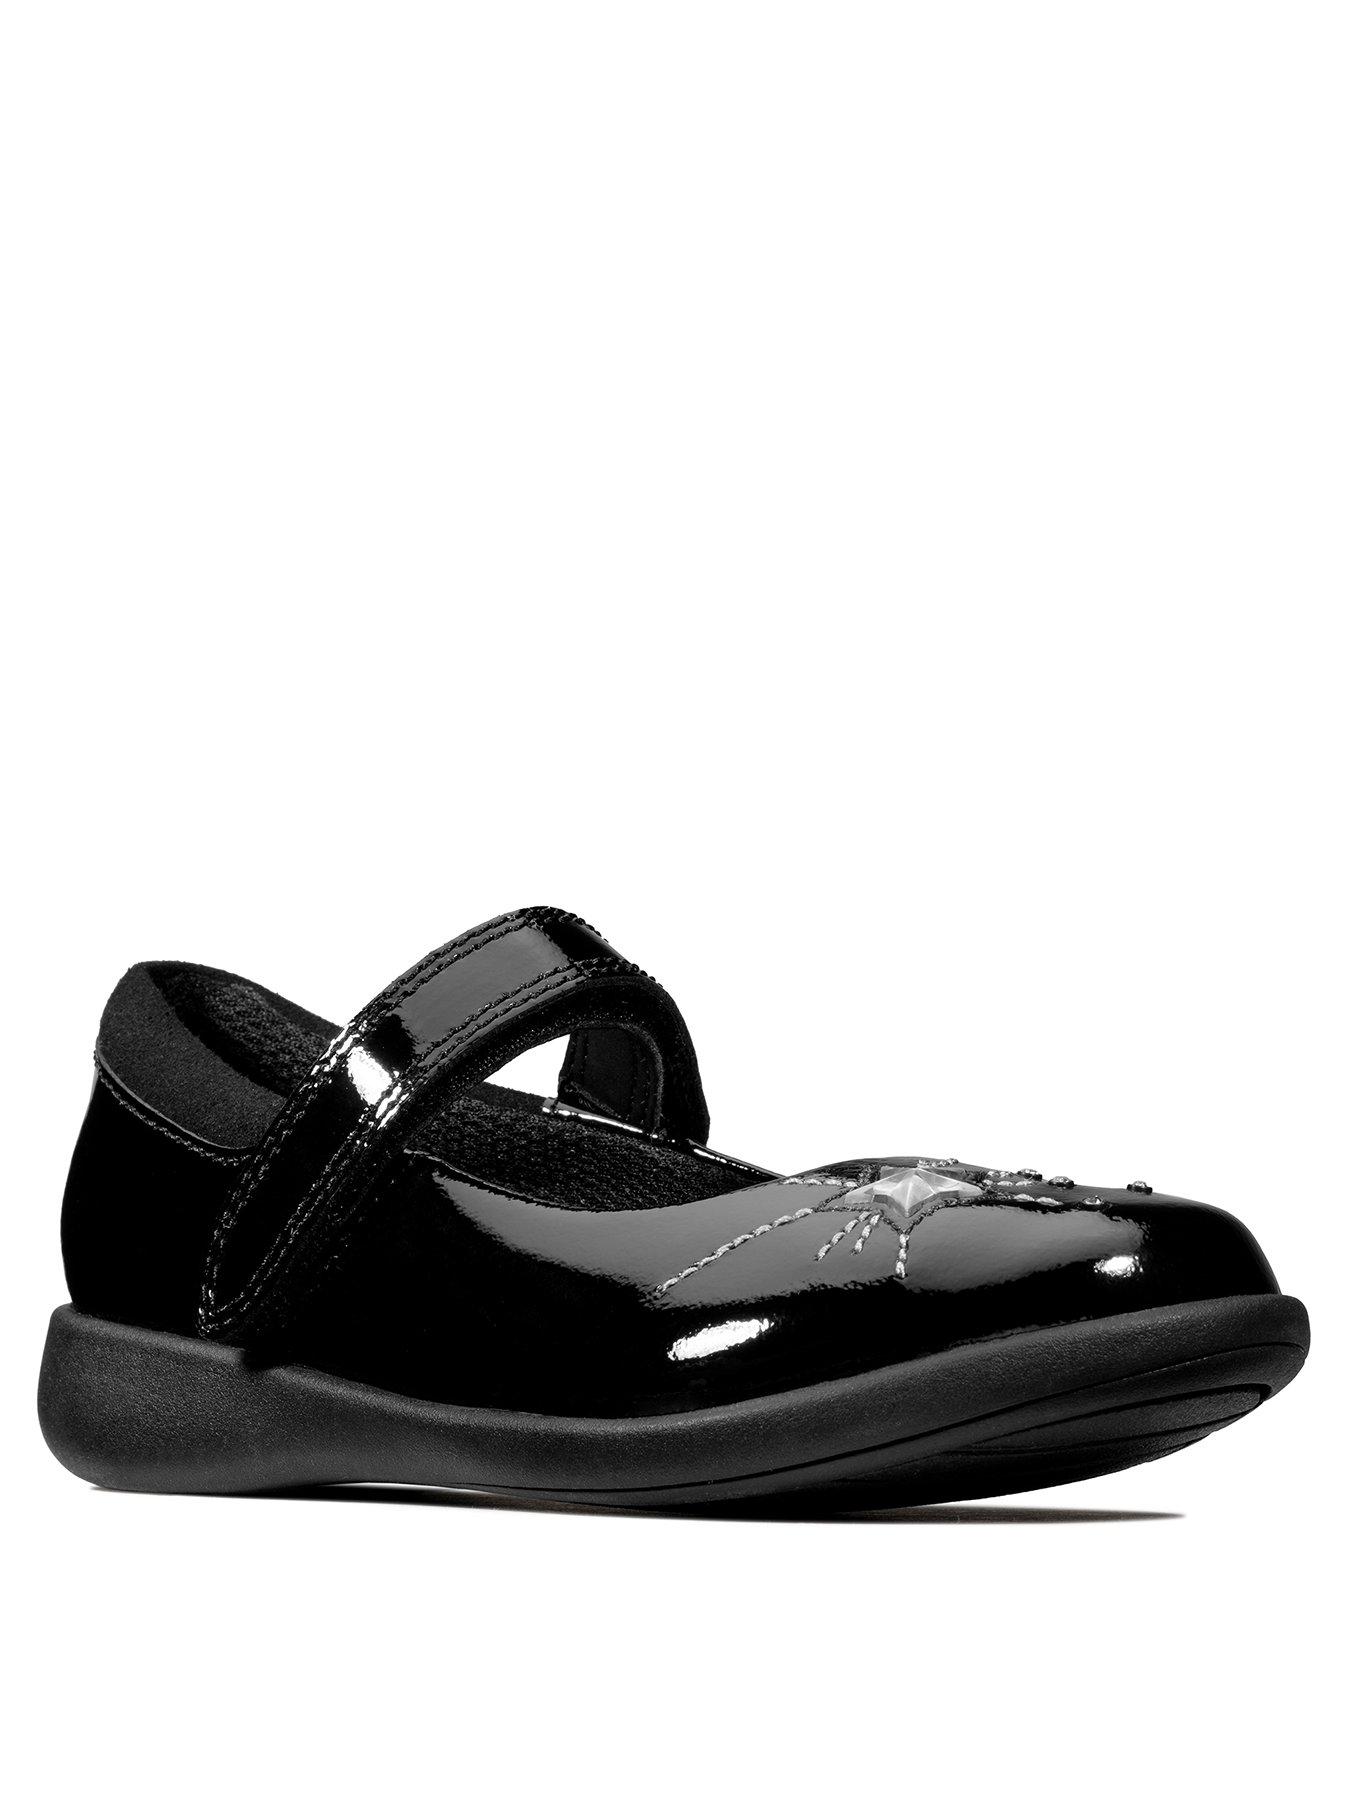 Clarks Etch Craft Kid Patent Shoes in Black Patent